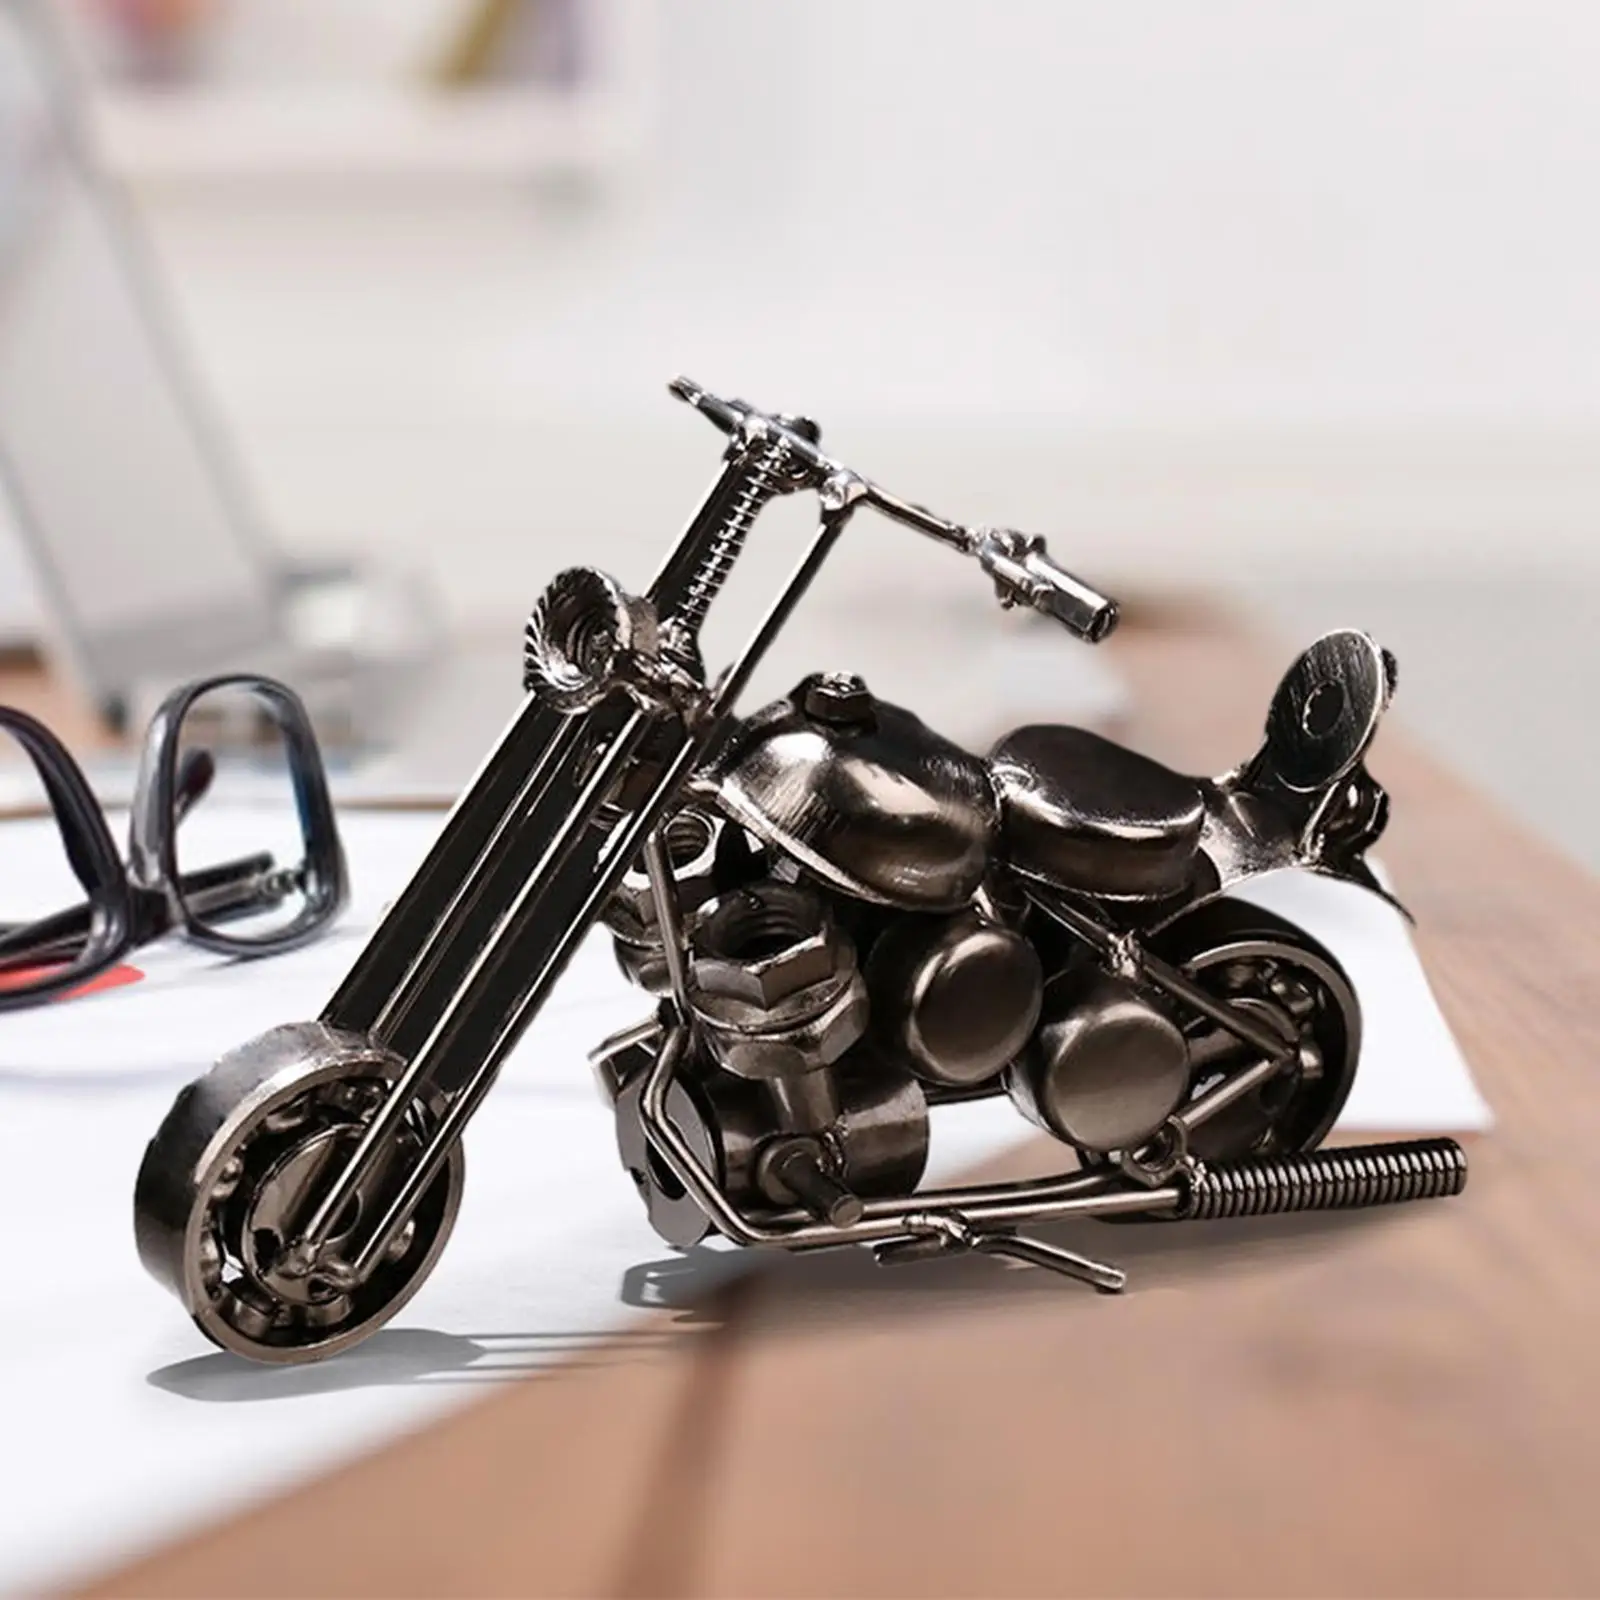 Motorcycle Model Motorcycle Sculpture Artwork Decor Crafts Birthday Gift Motorcycle Figurine for Office Home Desk Men Adults